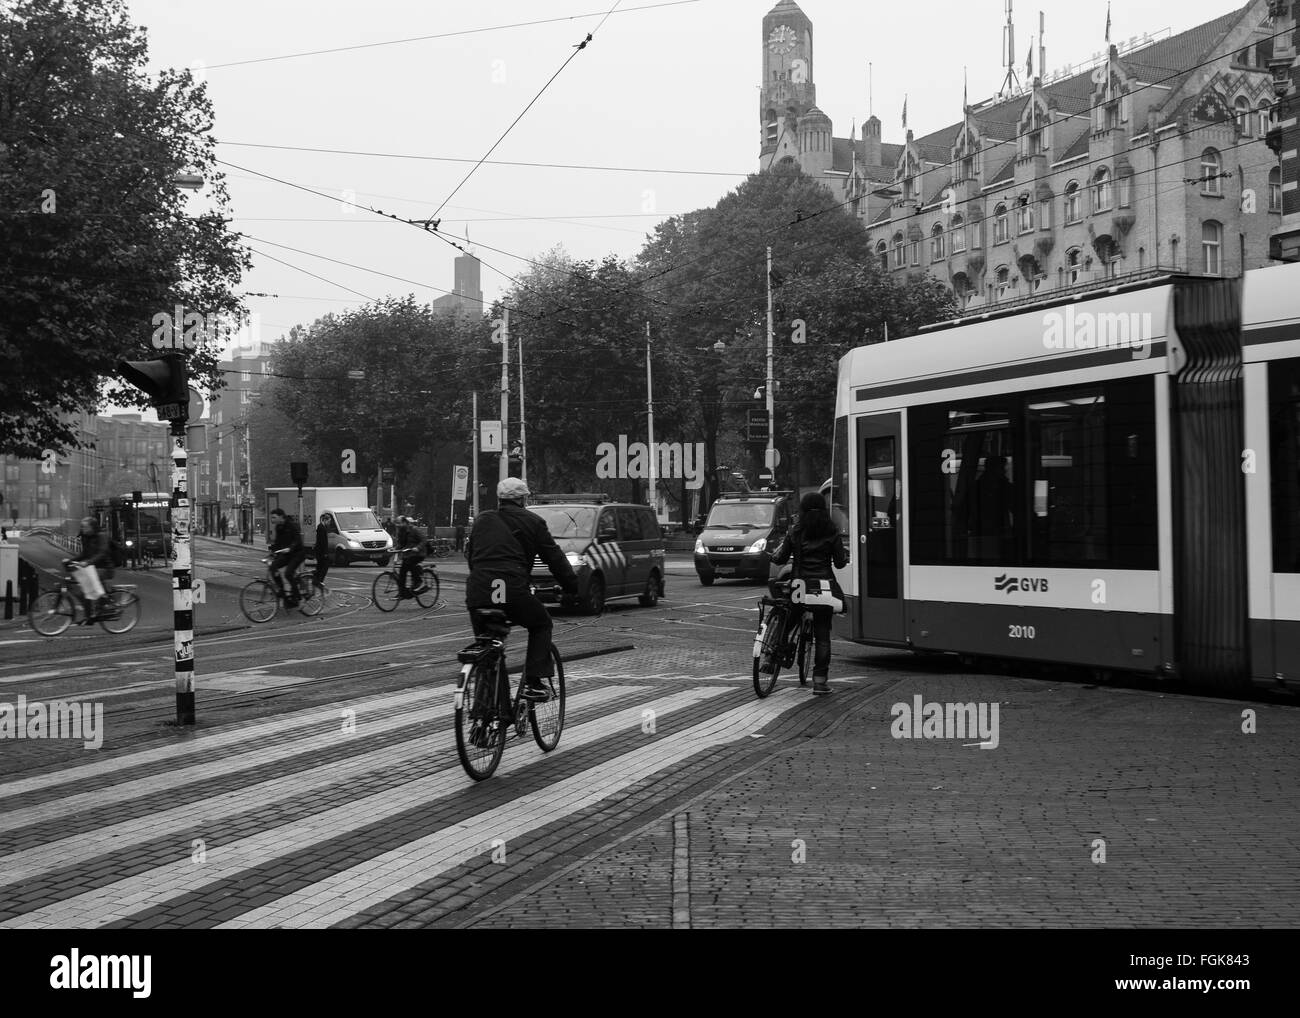 Cars, Trams and cyclists all travel through Leidseplein in Amsterdam Stock Photo